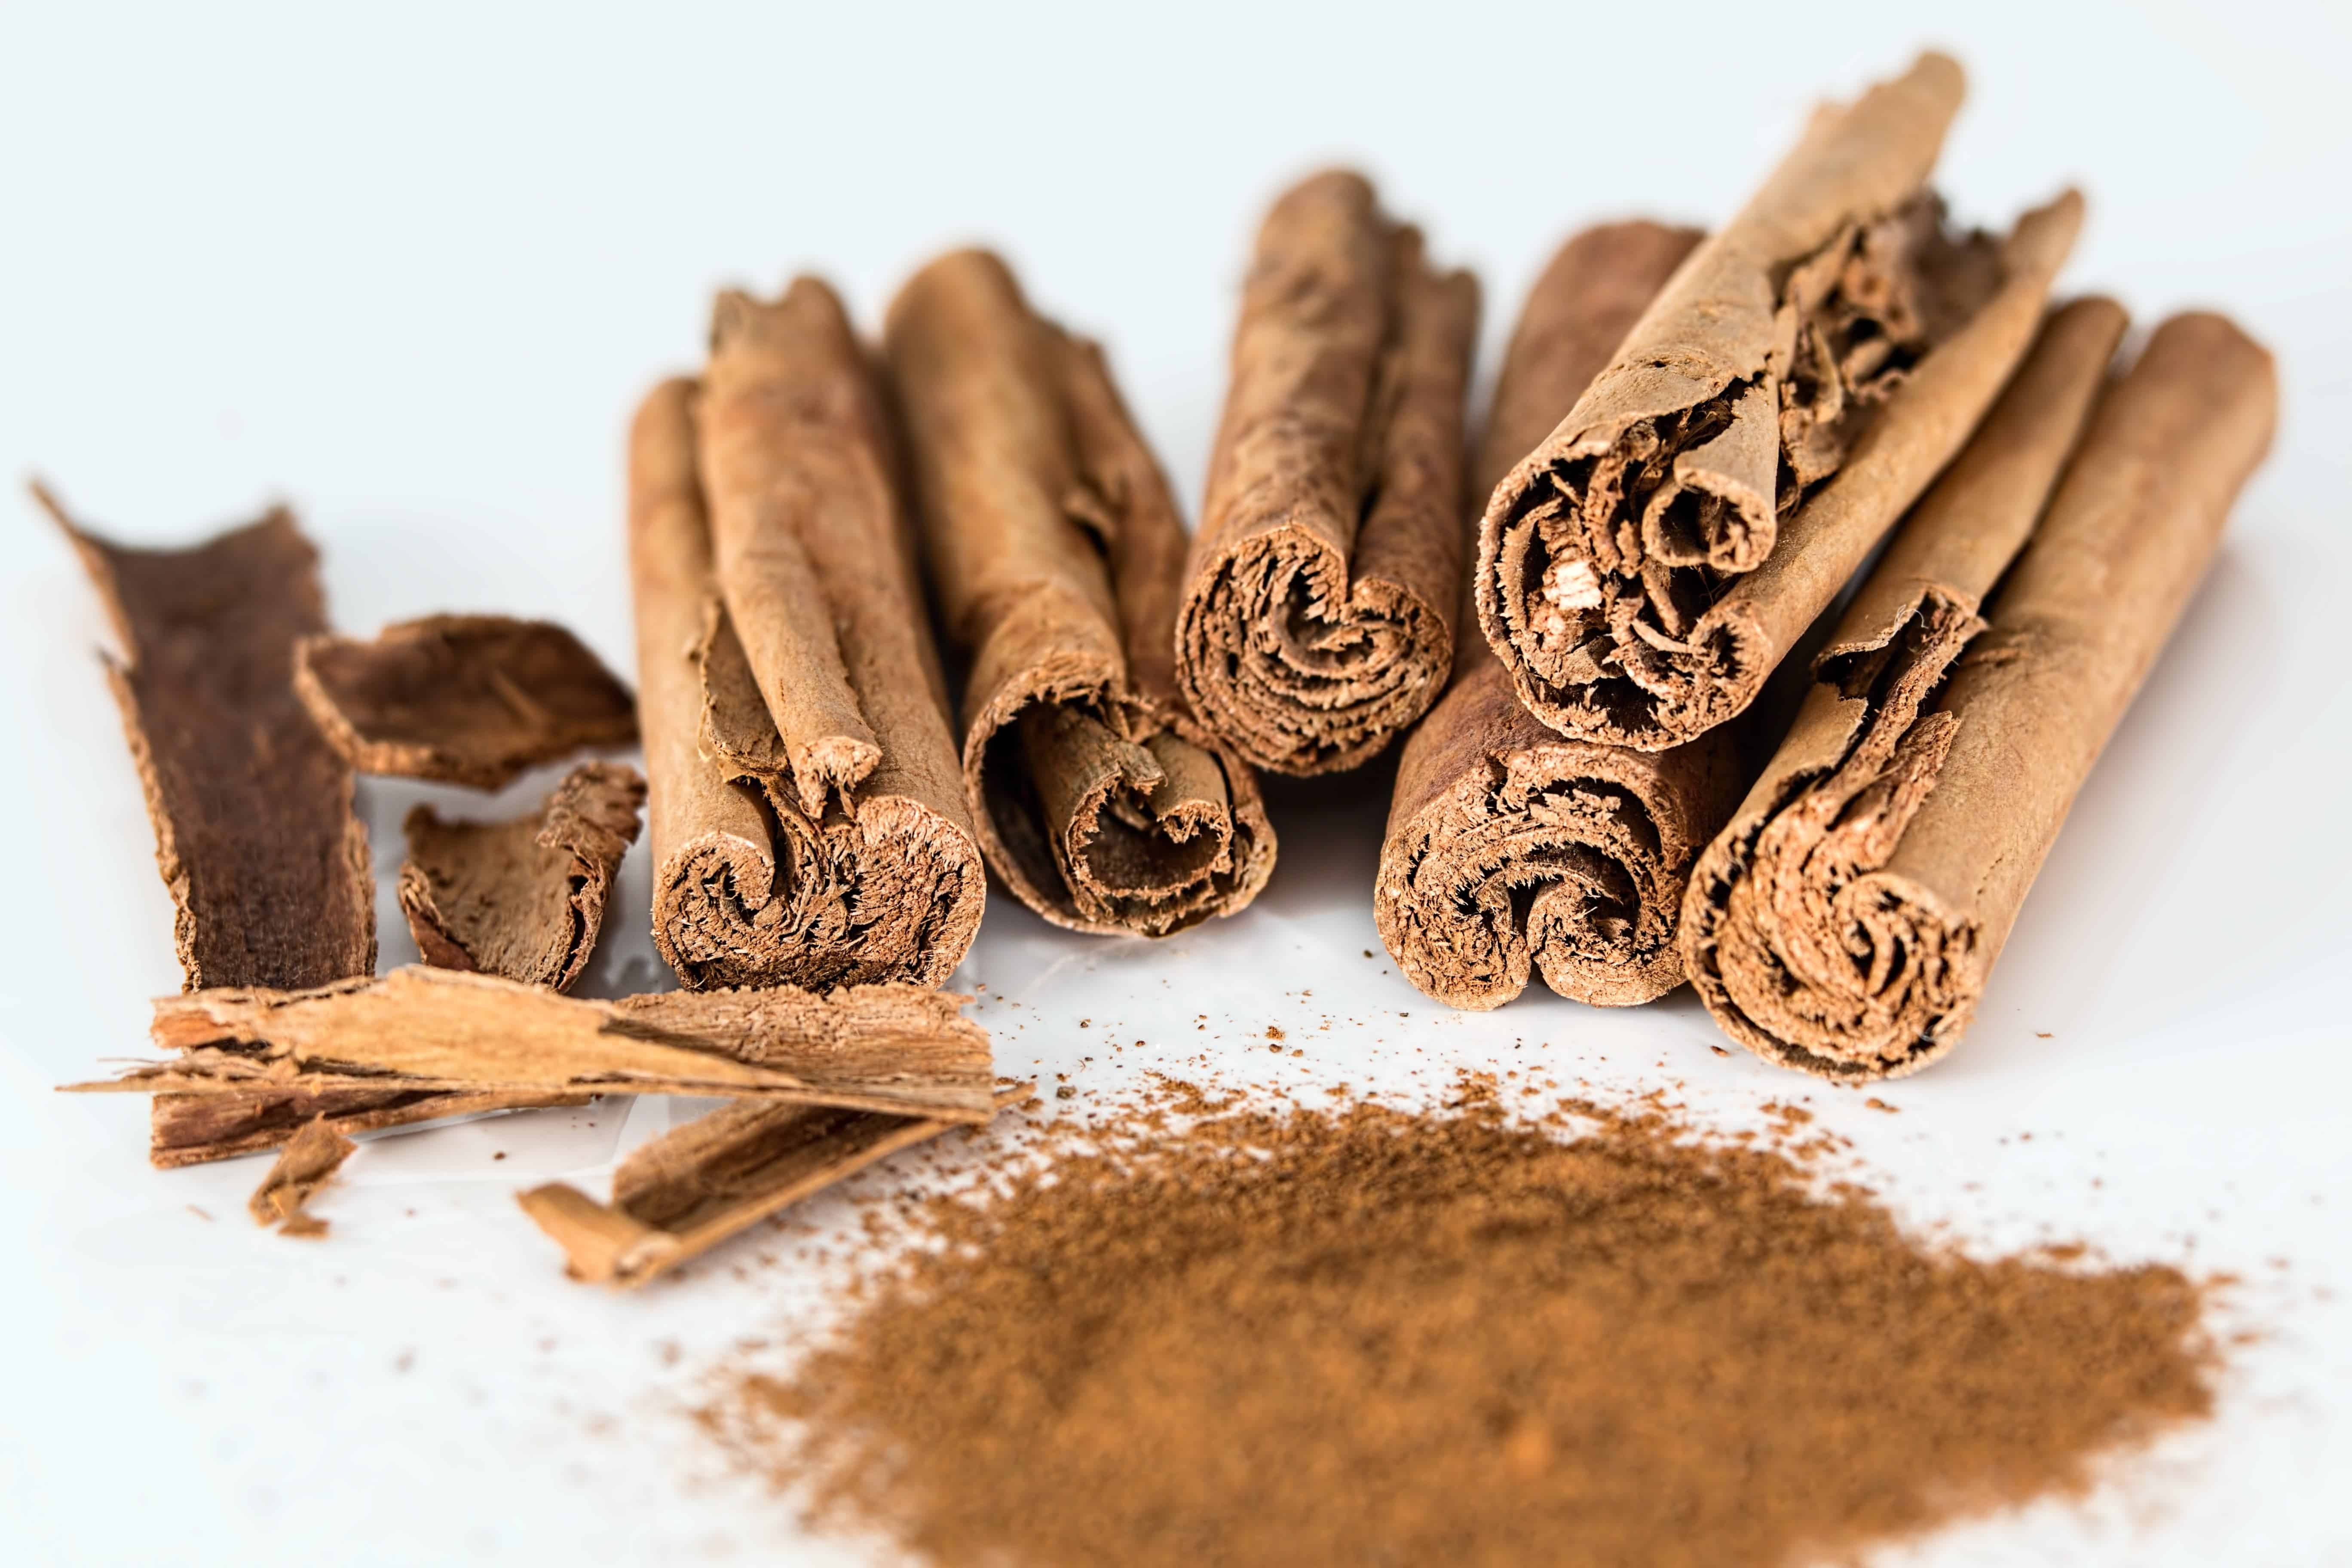 It's no miracle food, but cinnamon might some day be used to fight obesity. Image via Pexels.